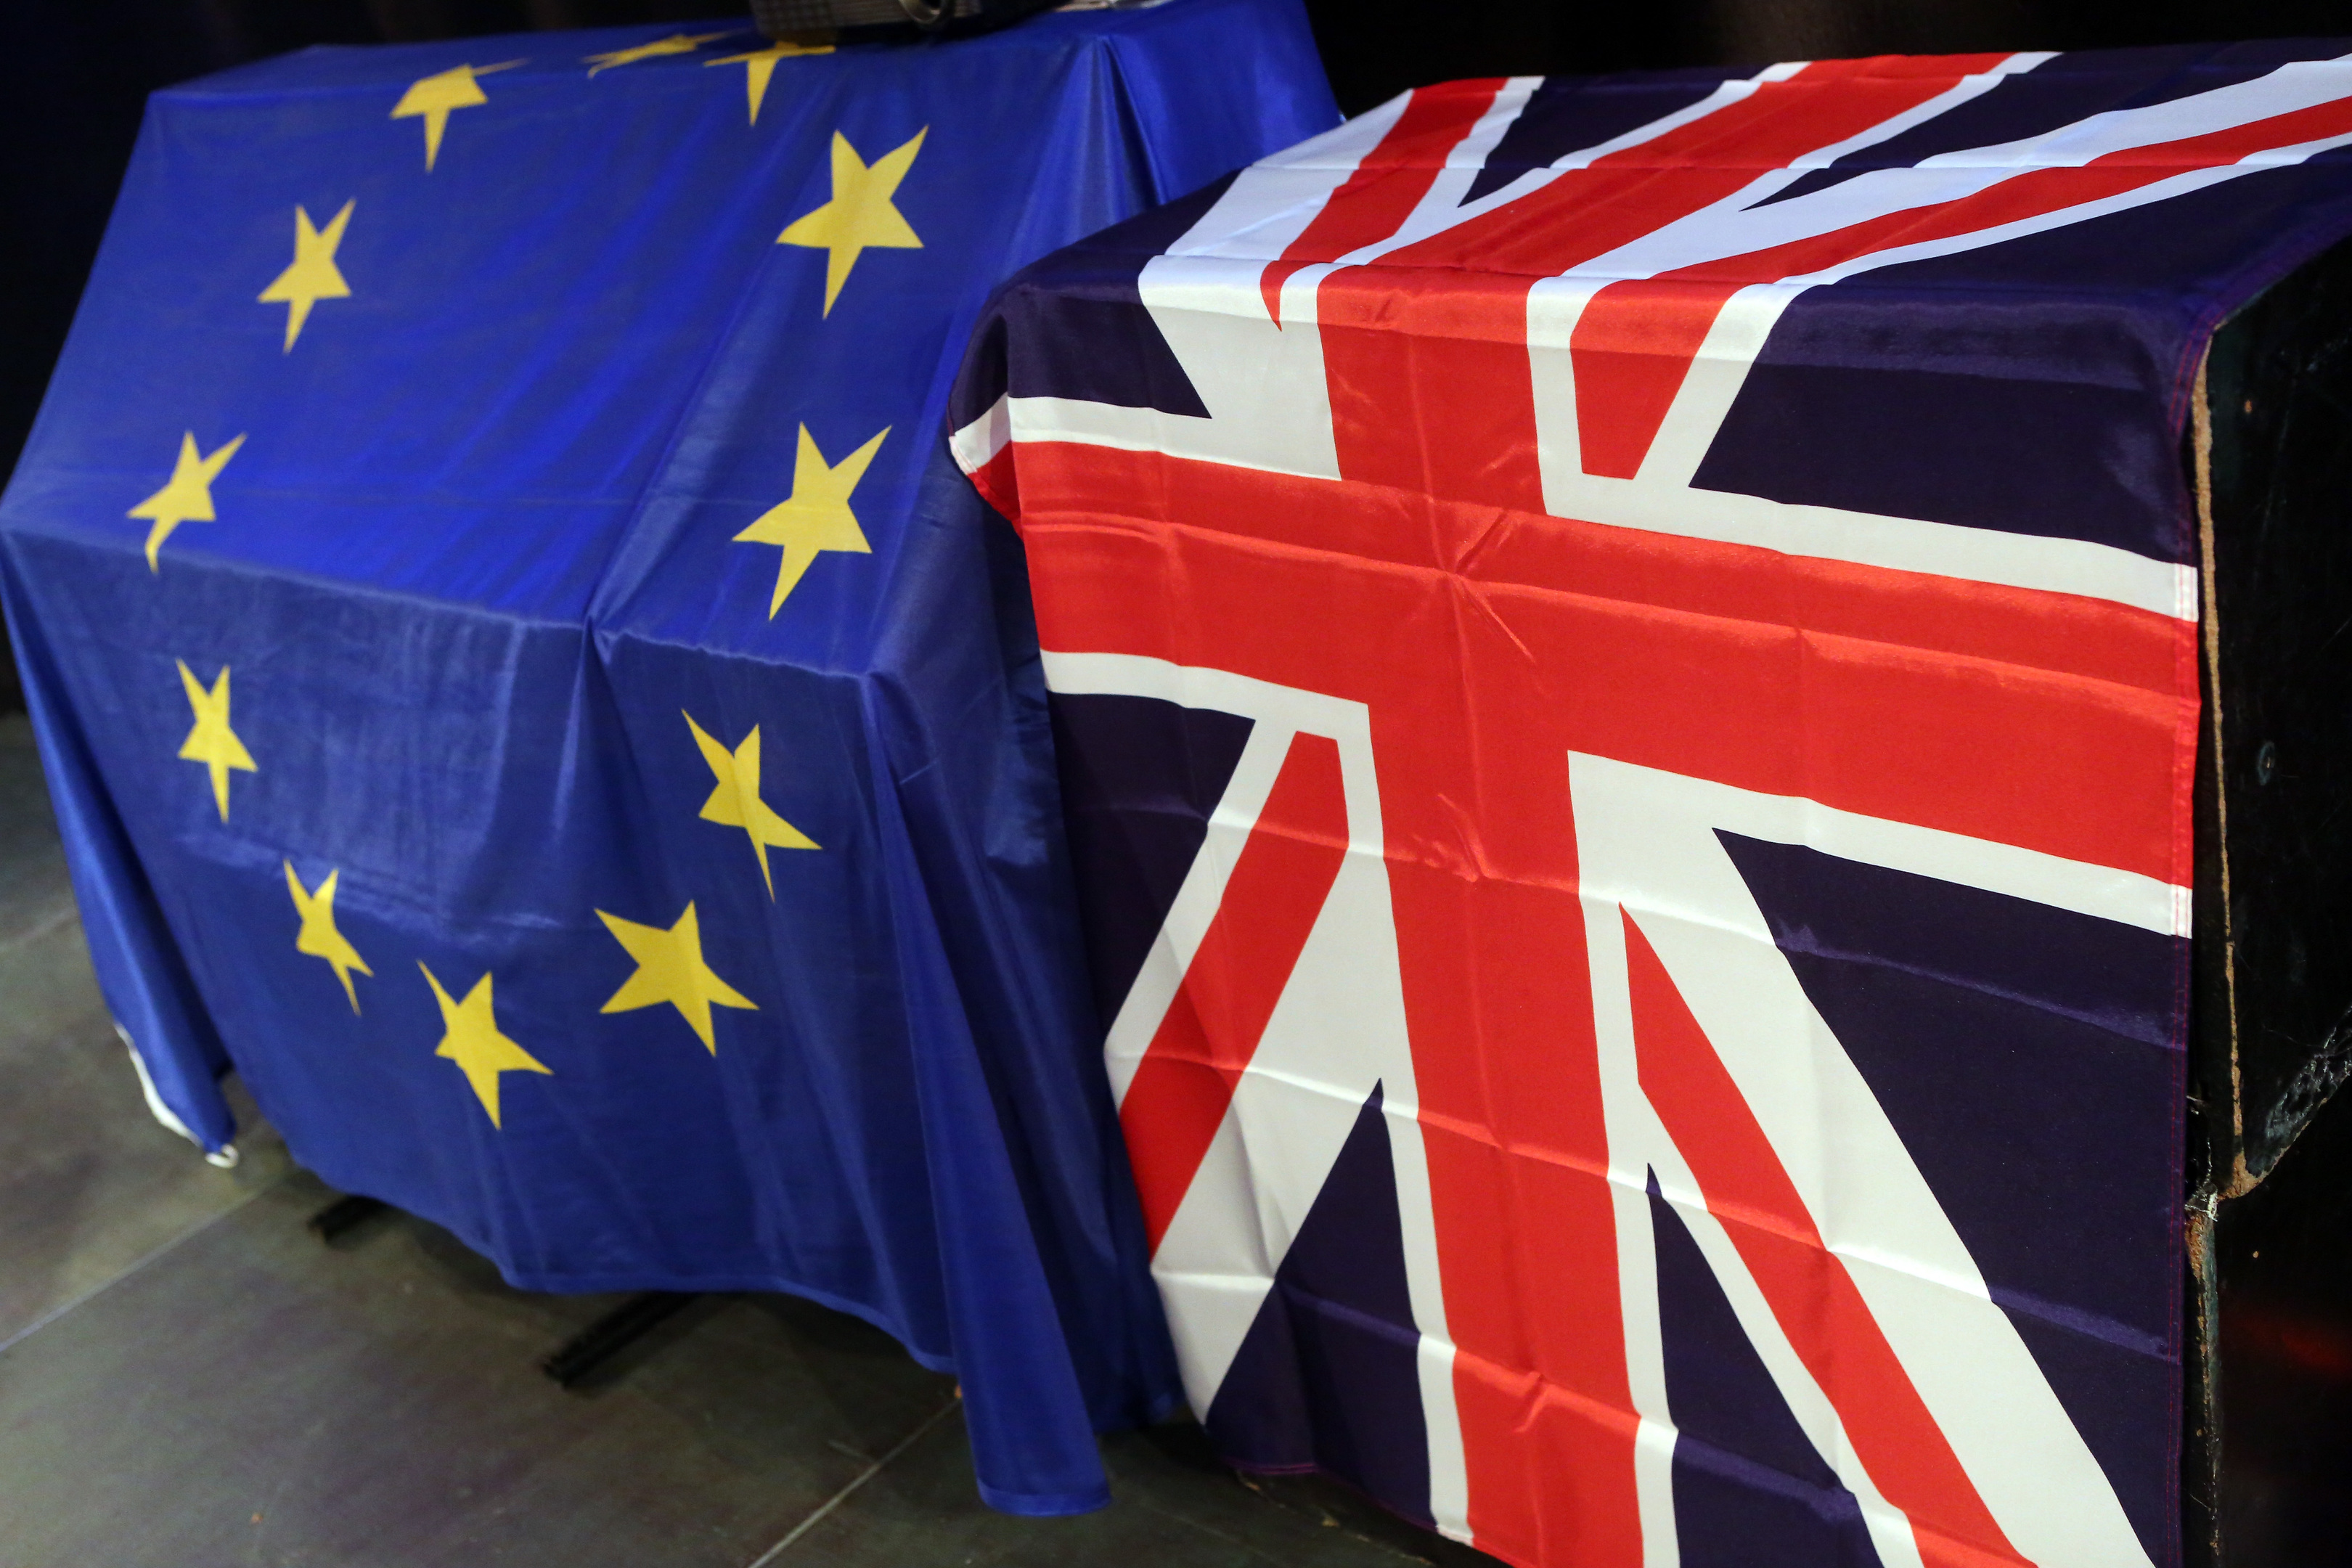 The implications of the UK leaving the EU are still the subject of much speculation.